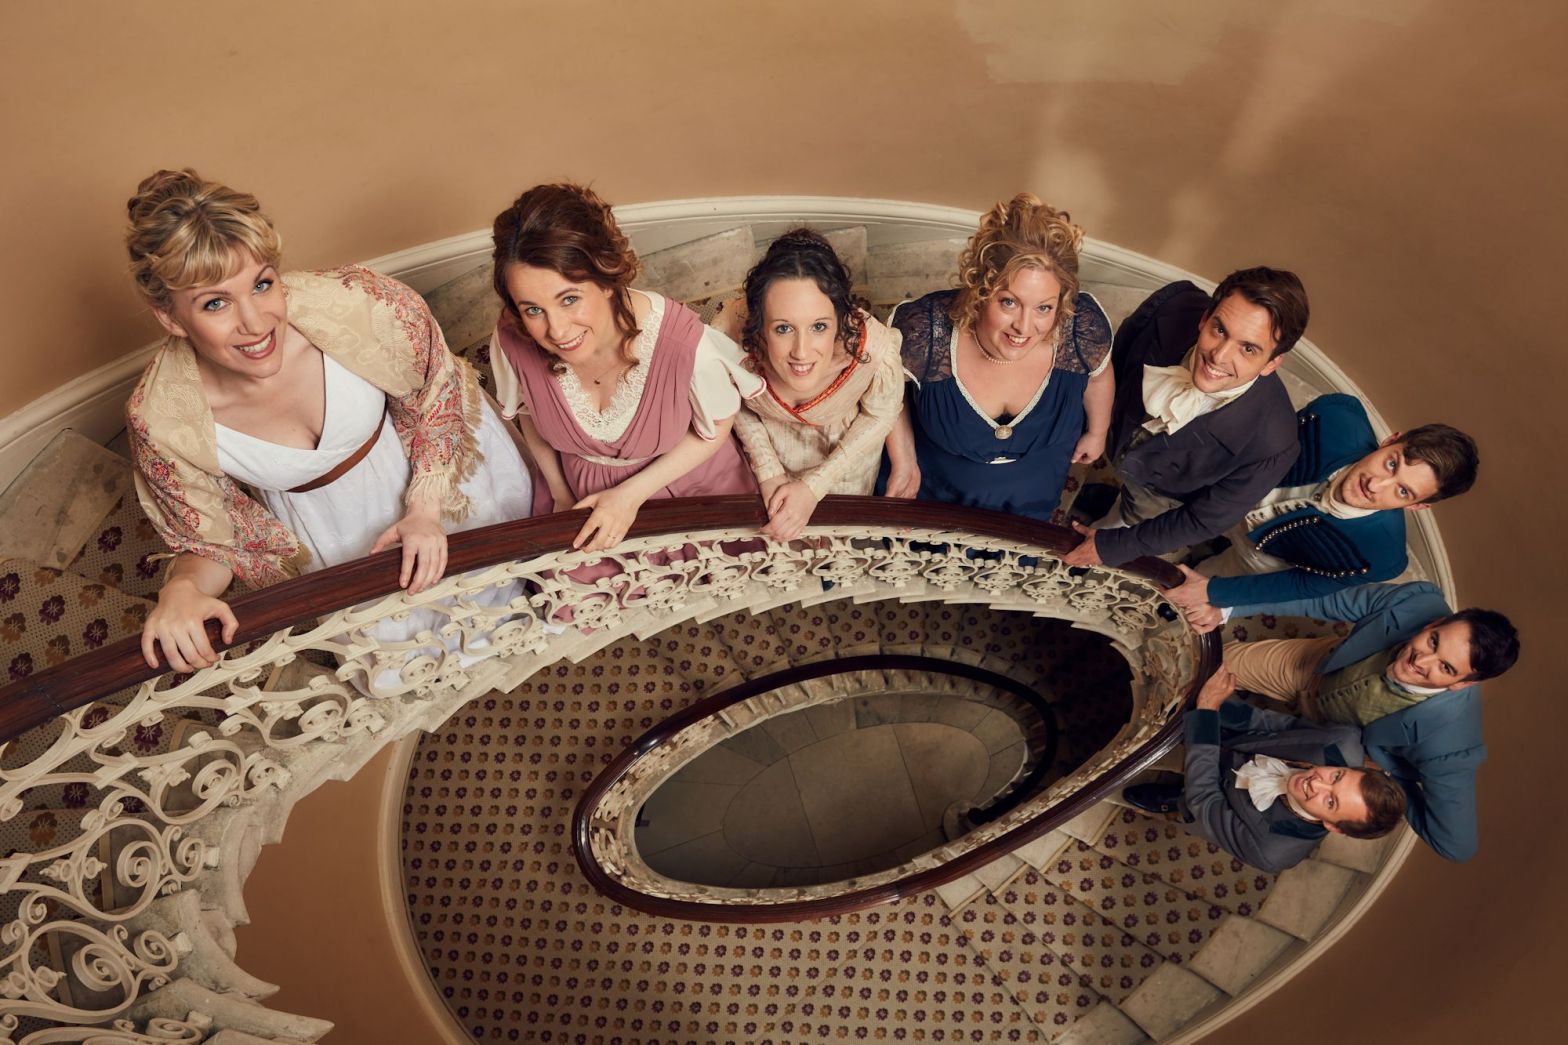 Eight performers in regency costumes line up on a spiral staircase.